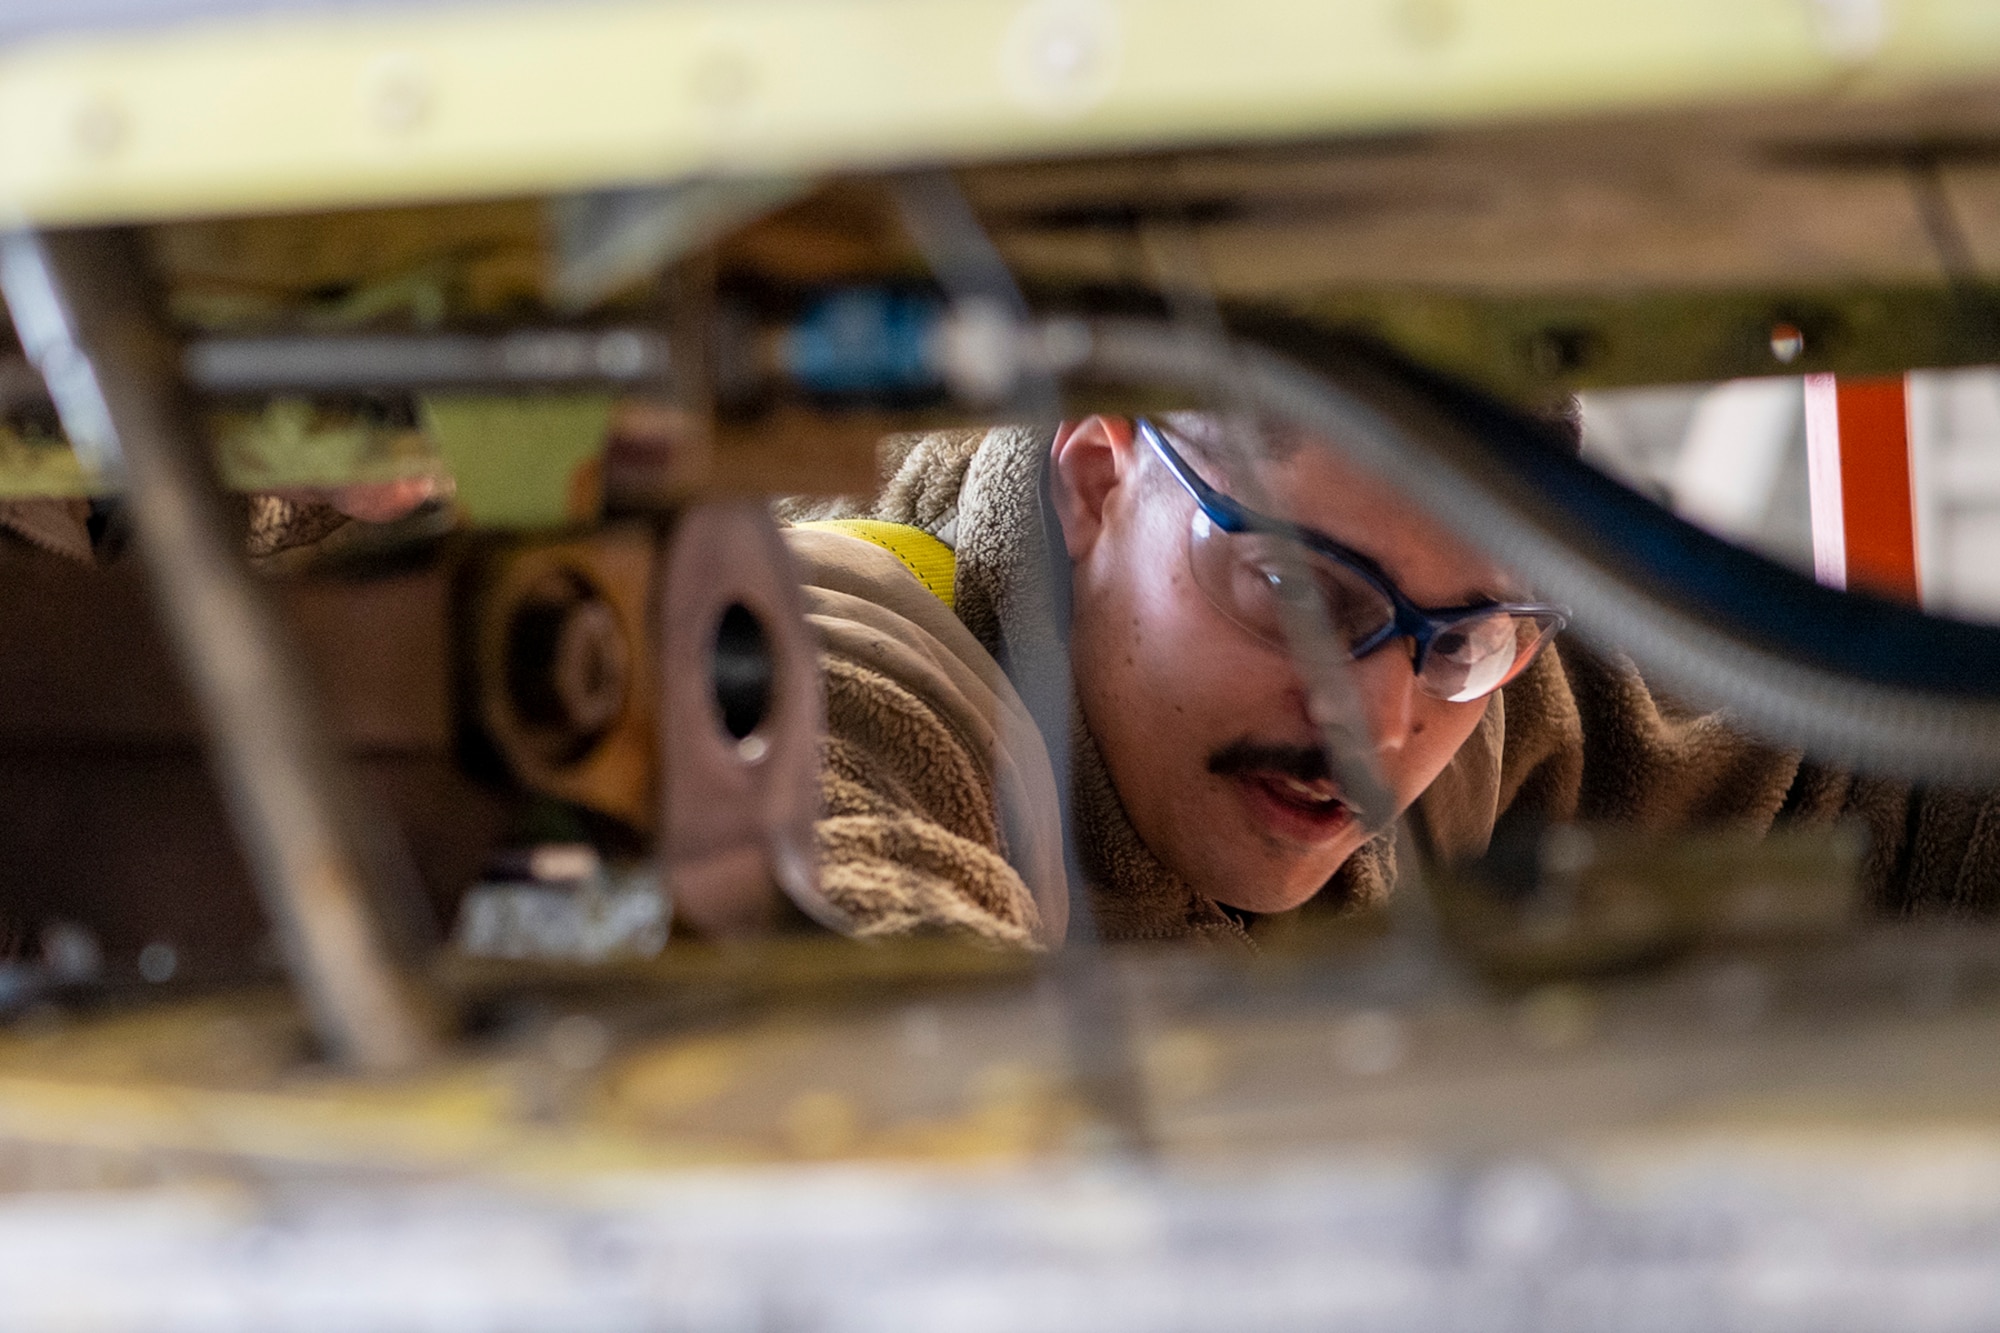 Tech. Sgt. Joel Pfeiffer, 434th Maintenance Squadron repair and reclamation technician, peers into the confined workspace where faulty tail pins had to be replaced on March 16, 2023. The pin replacement was mandated by a time compliant technical order issued recently that grounded KC-135R Stratotankers that didn’t meet required specifications. (U.S. Air Force photo by Douglas Hays)